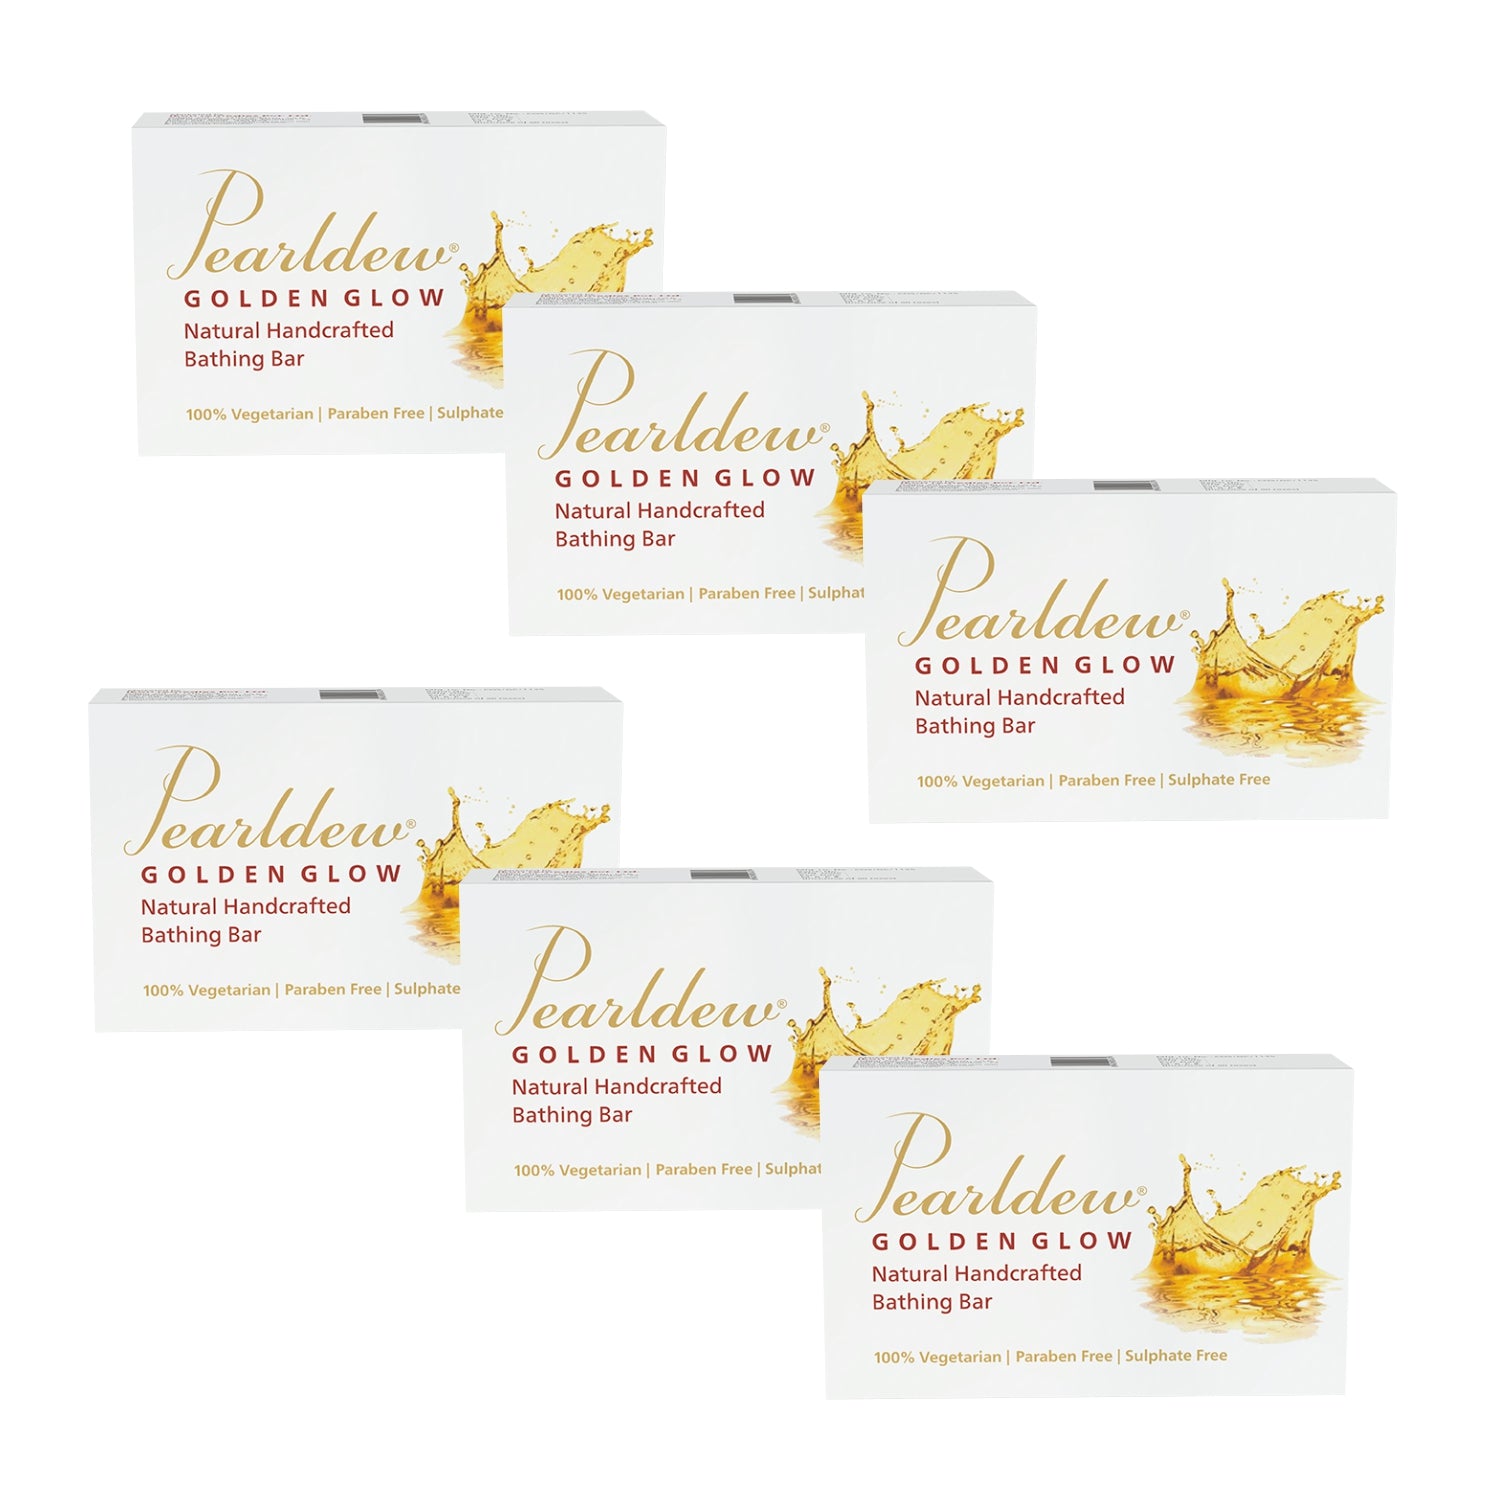 Pearldew Golden Glow Natural Handcrafted Bathing Bar (75 gm)